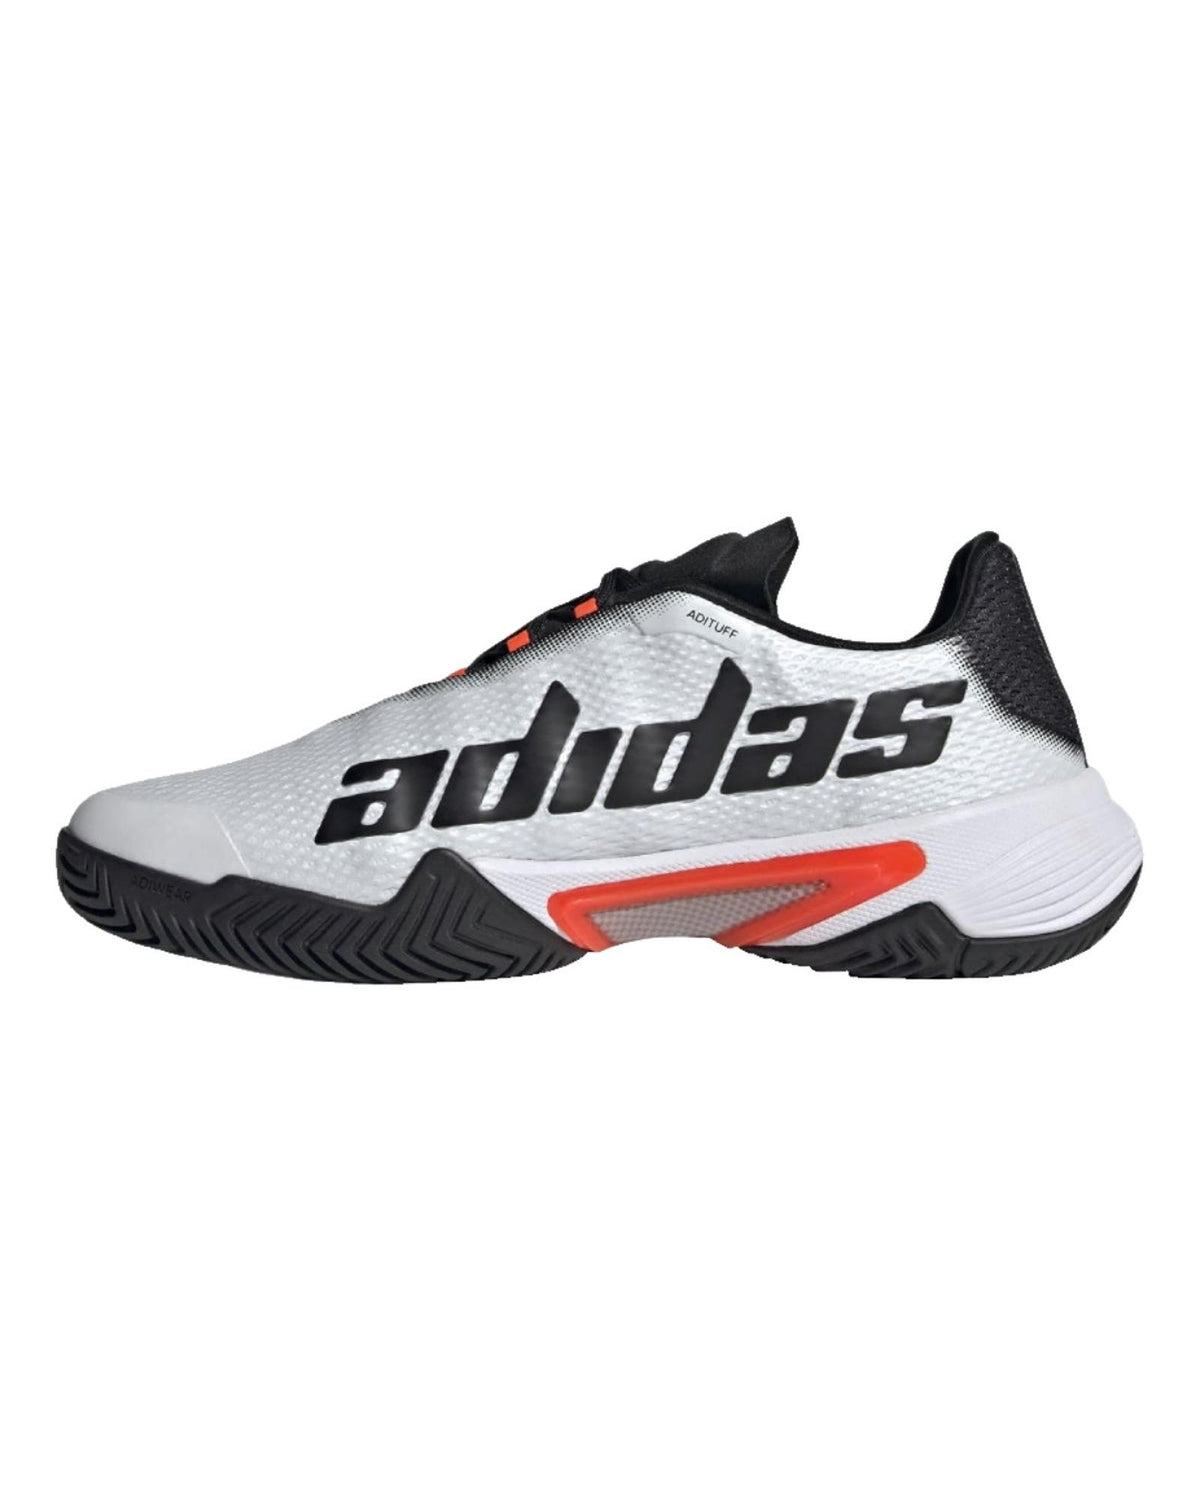 Barricade Tennis Shoes with Bounce Cushioning and Intuitive Lacing - 12 US